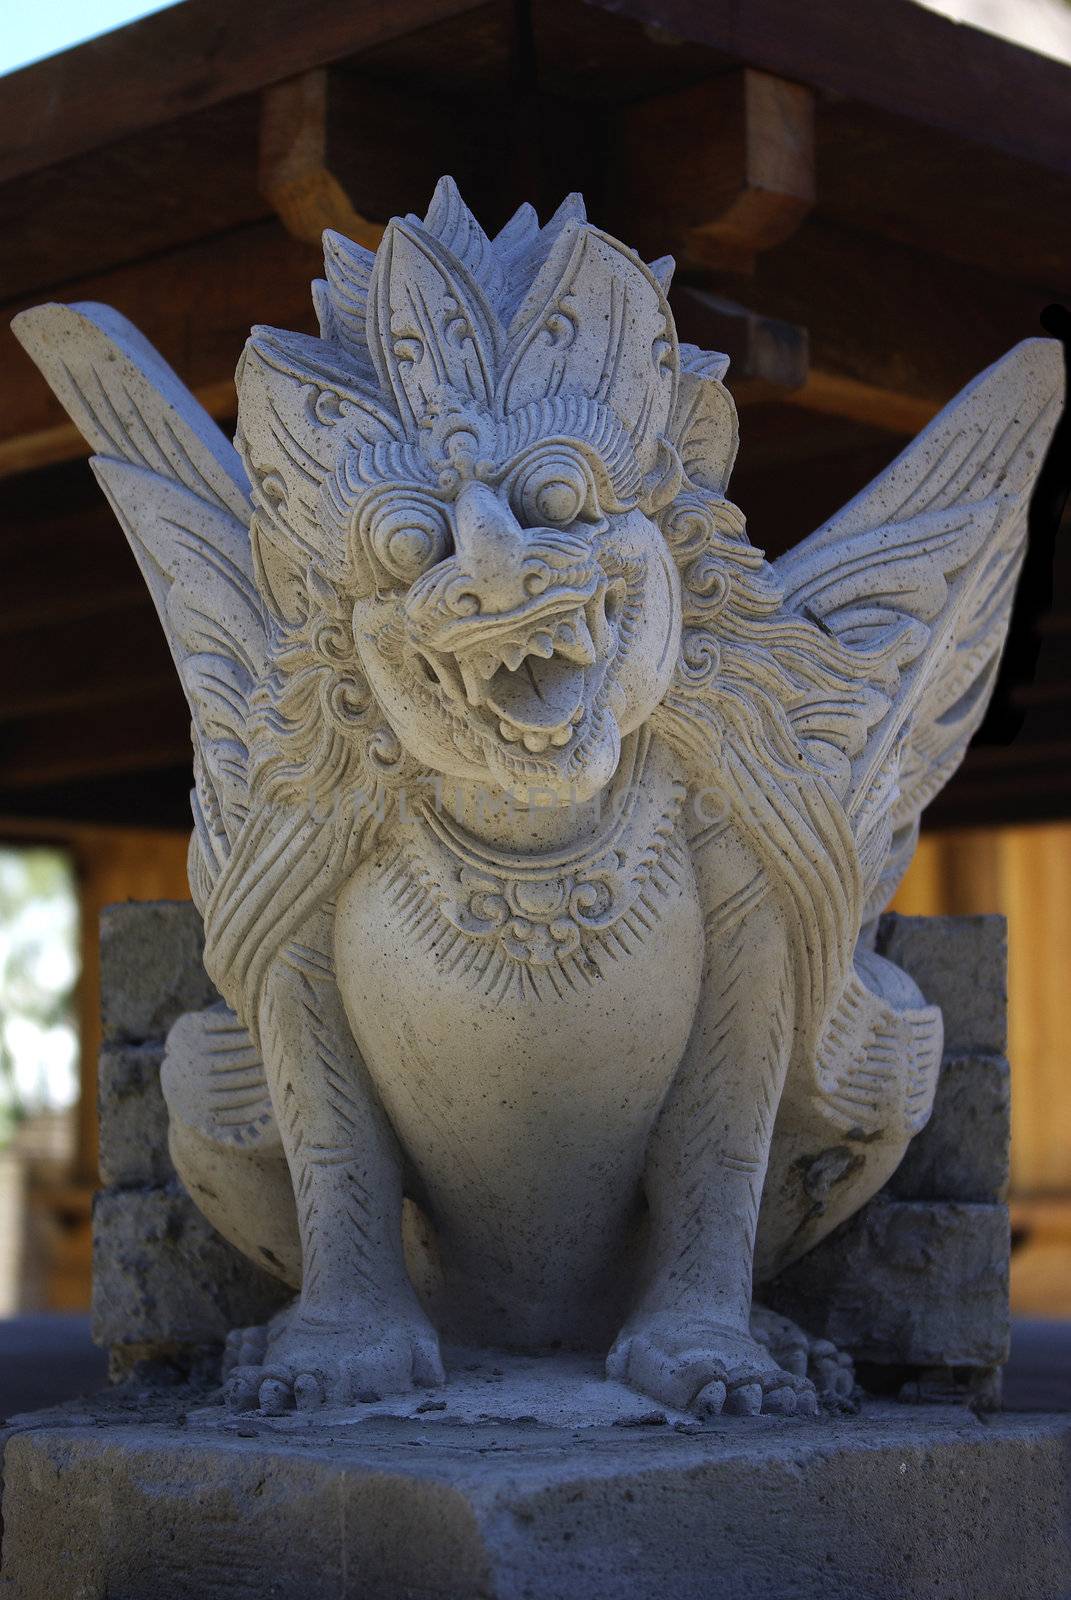 A closeup of a statue of a Hindu mind on the island of Bali